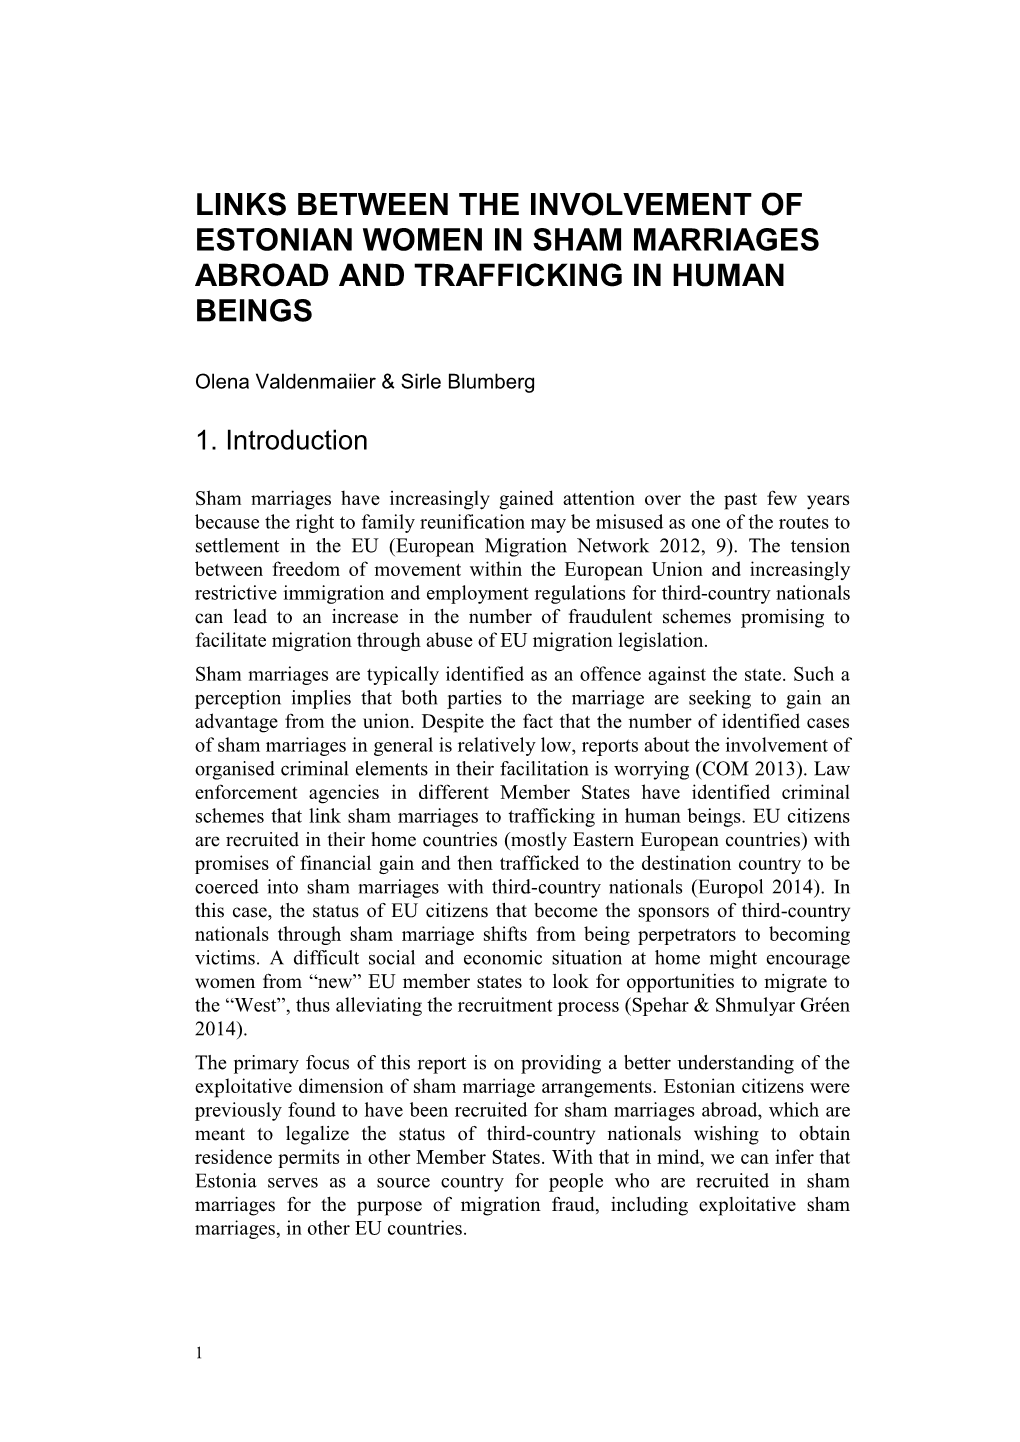 Links Between the Involvement of Estonian Women in Sham Marriages Abroad and Trafficking in Human Beings